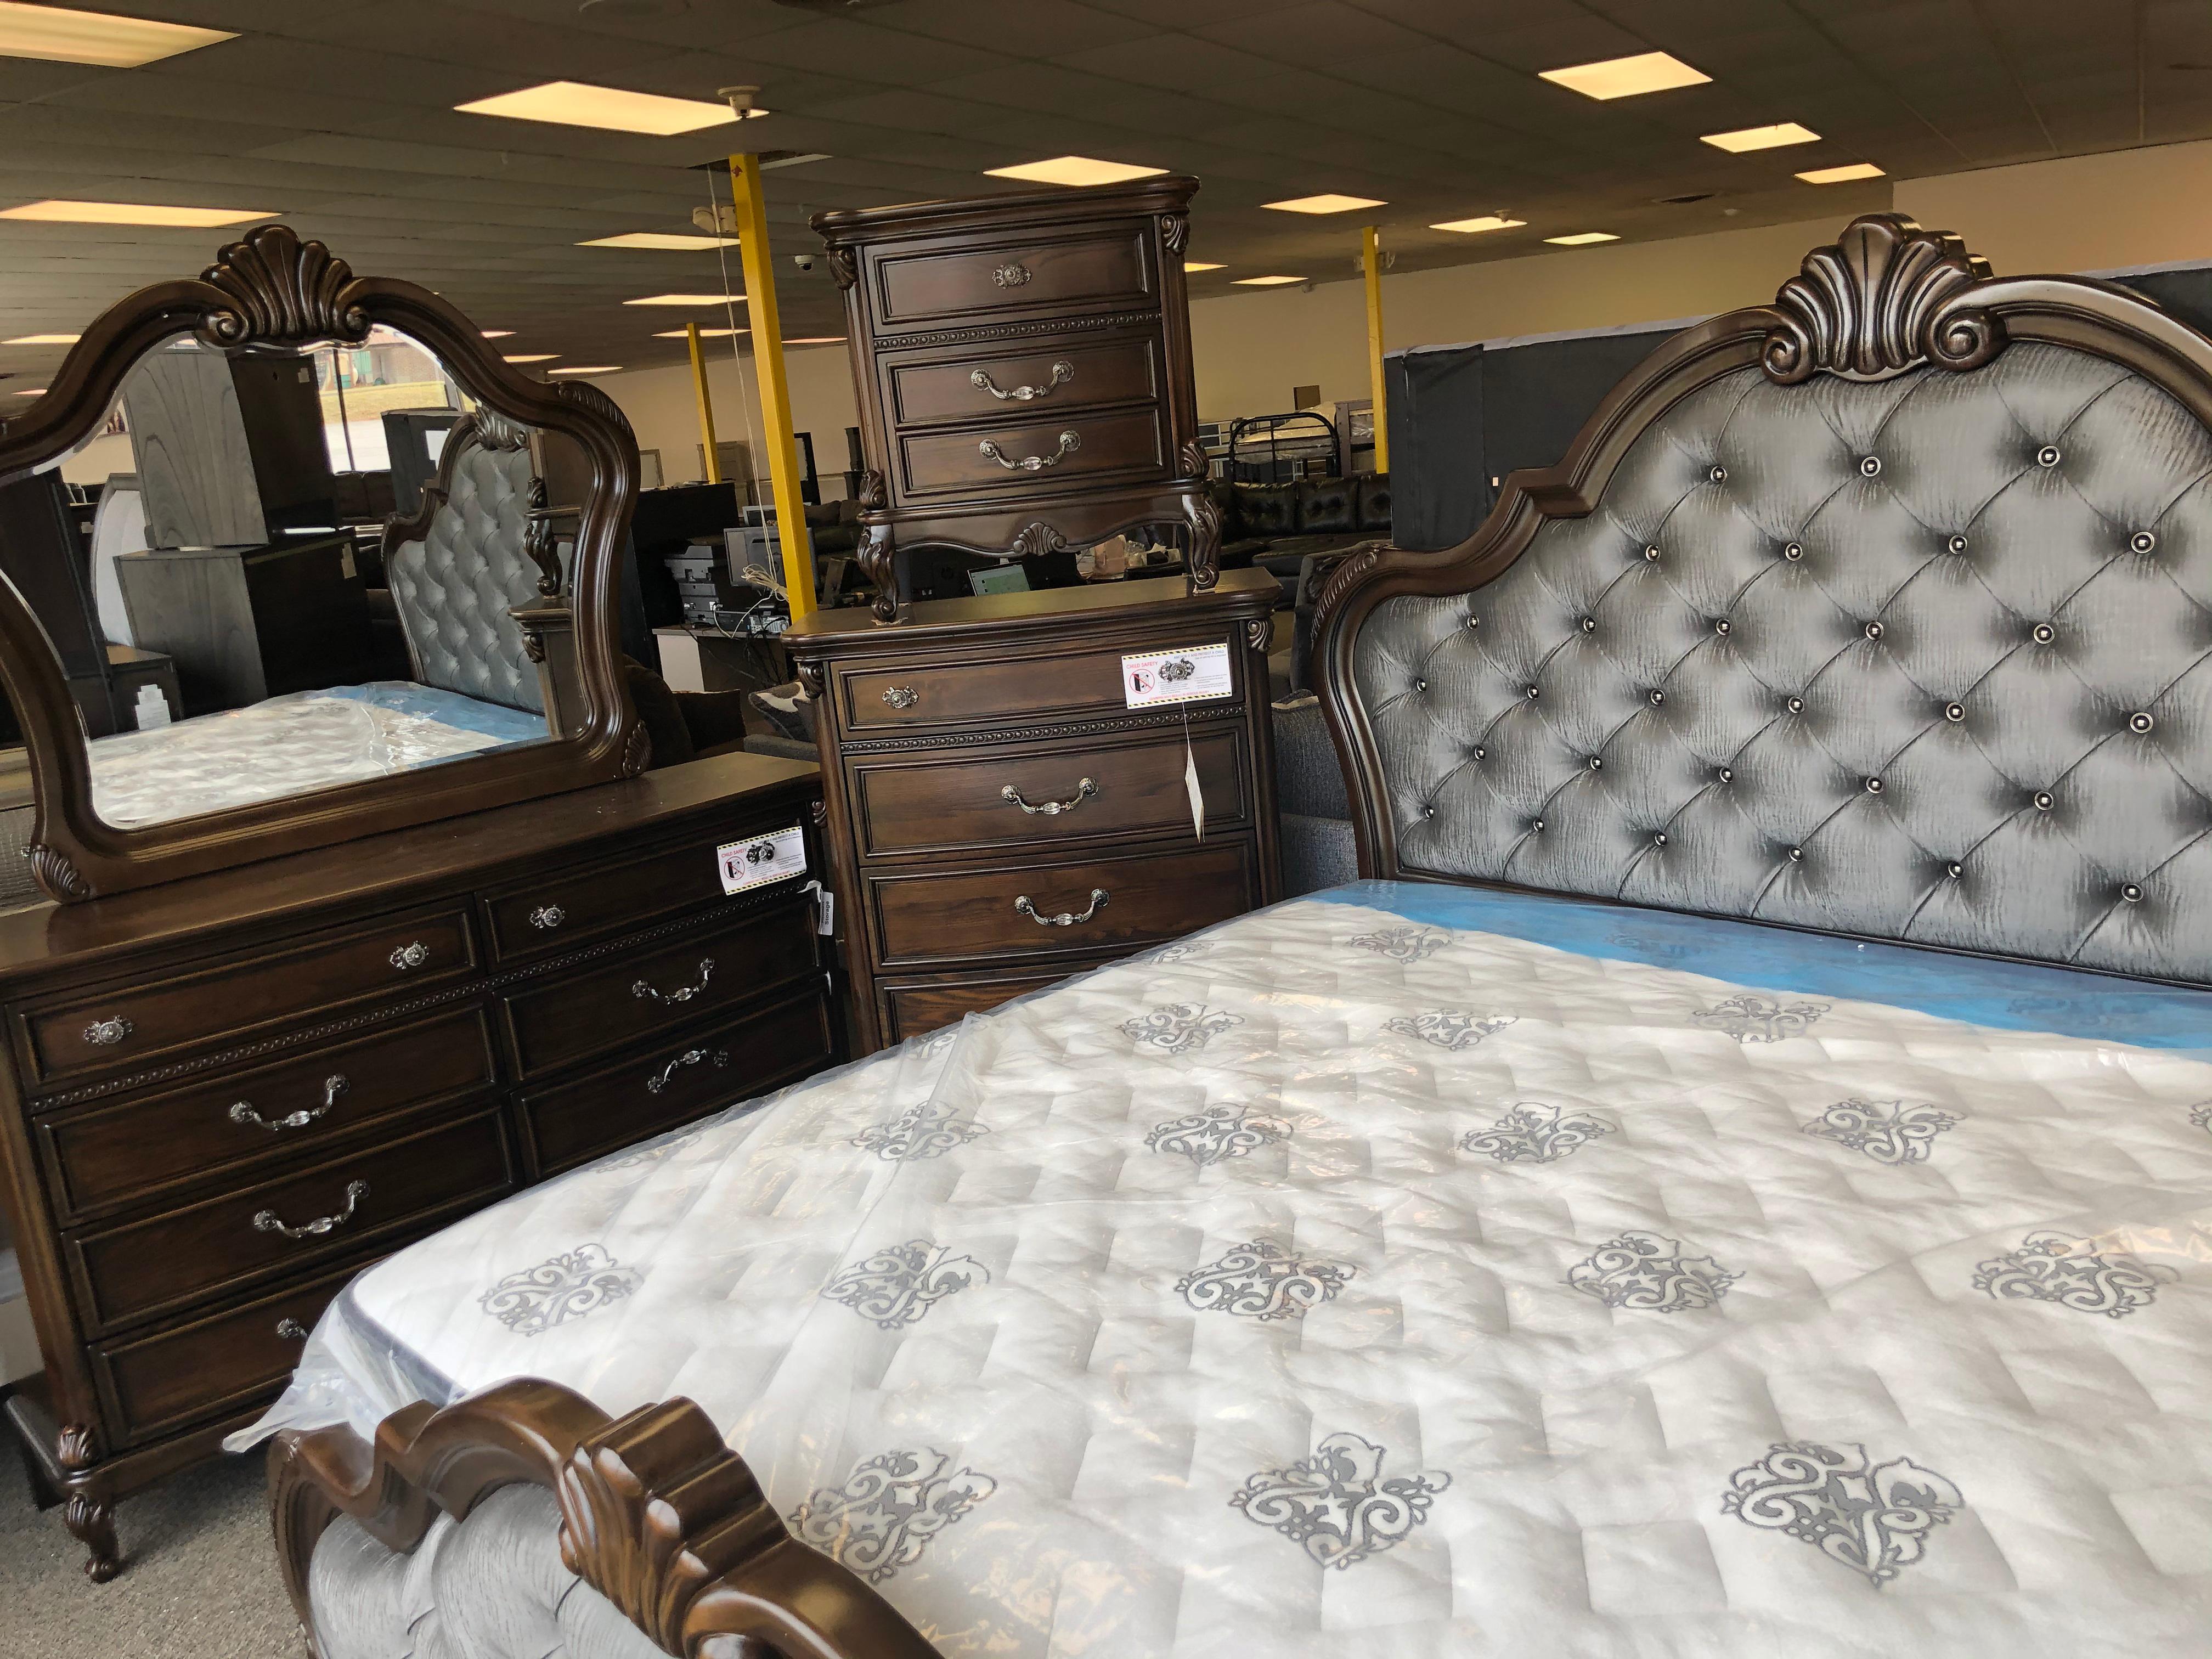 Price Busters Discount Furniture Photo